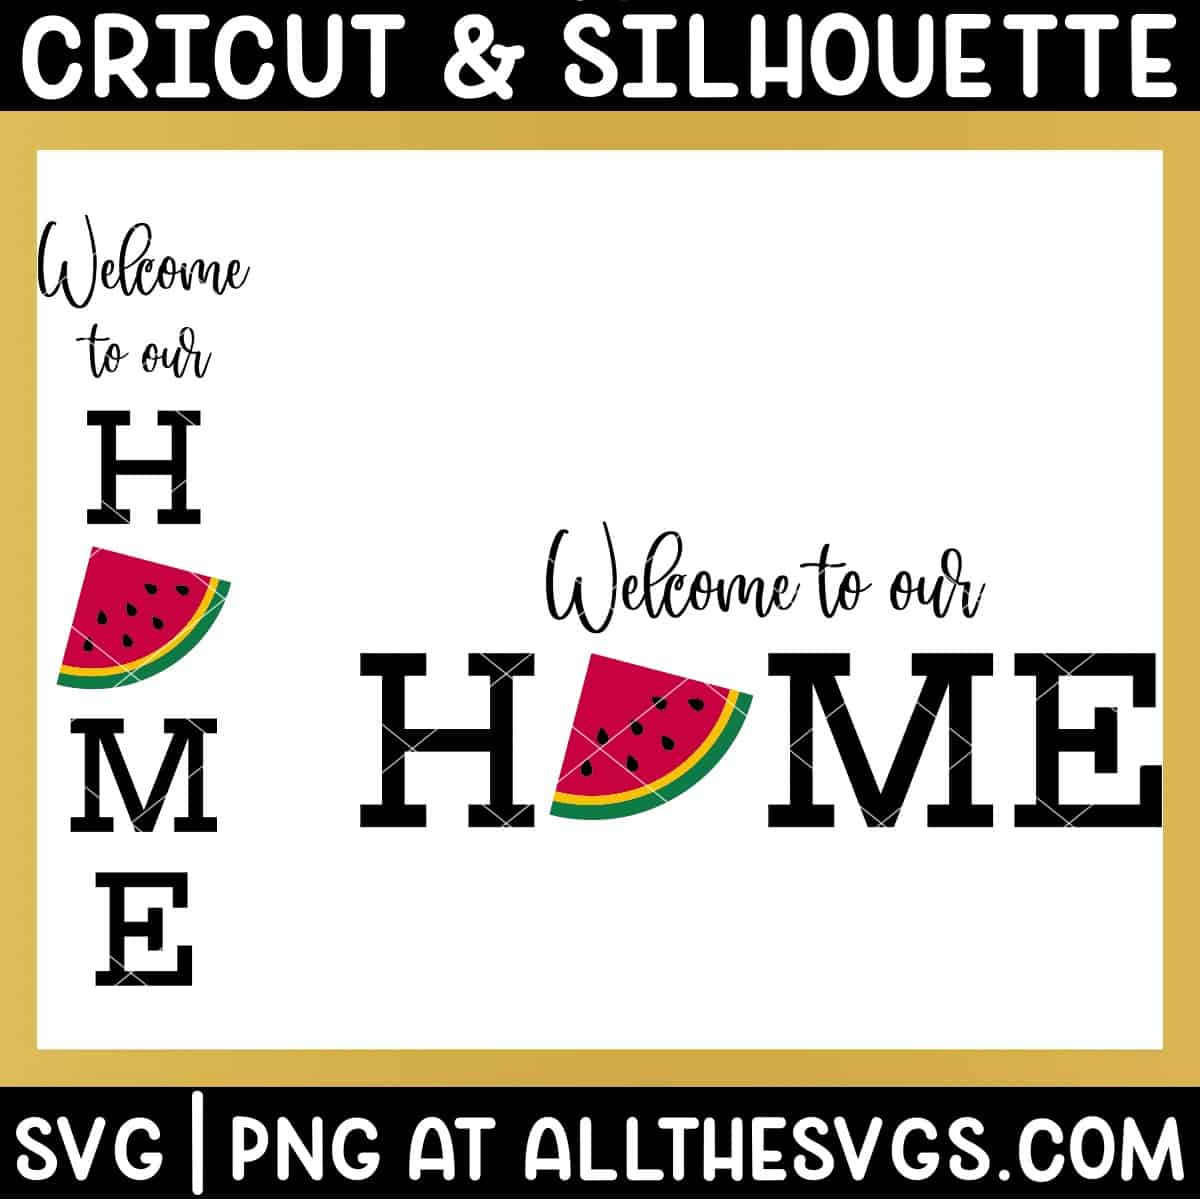 welcome to our home sign svg file with watermelon.